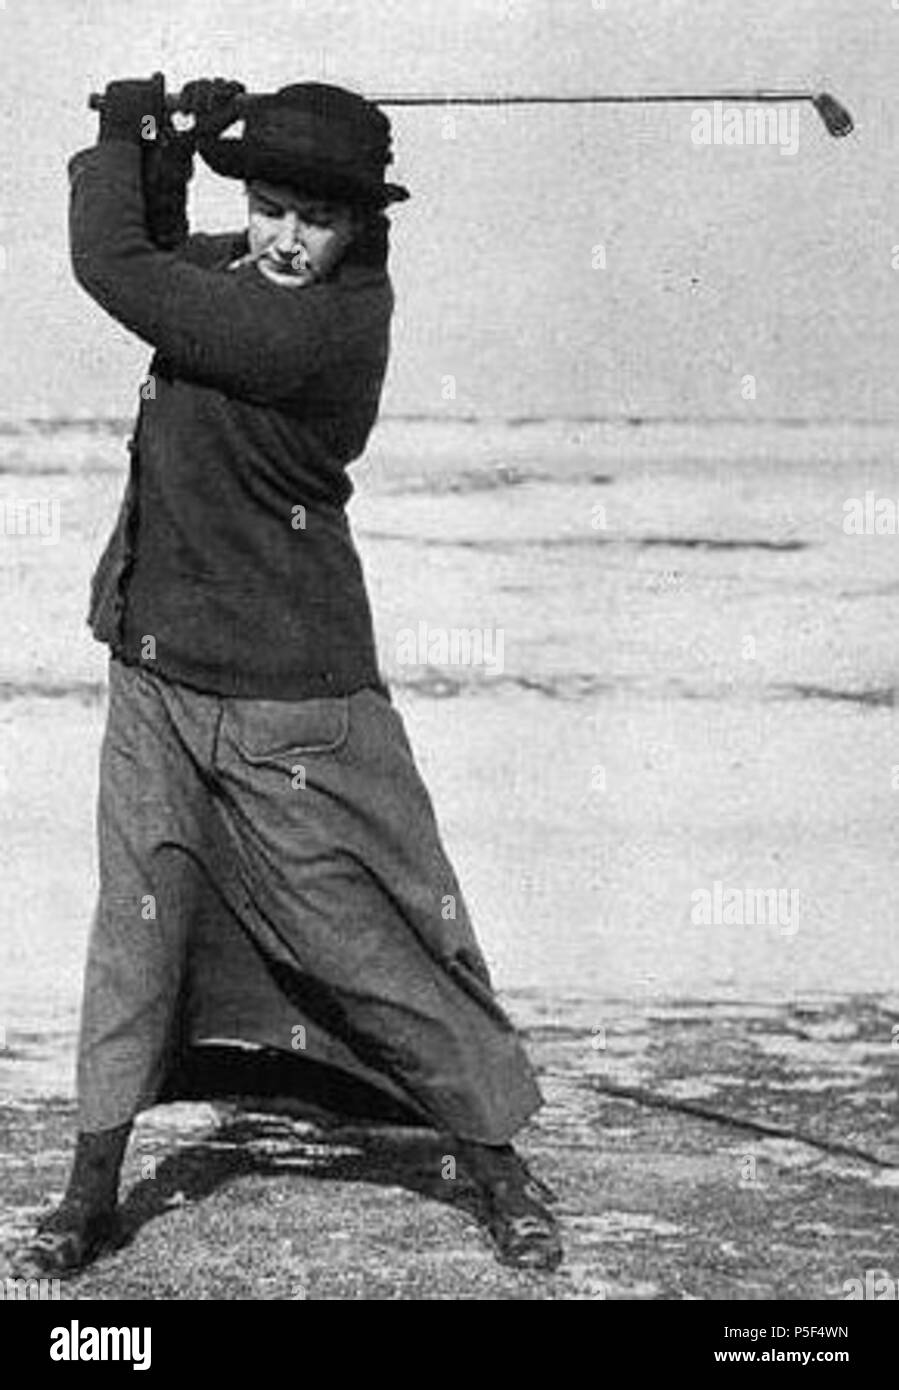 N/A. English: A circa 1907 photograph of golfer Dorothy Campbell Hurd. --EditorExtraordinaire (talk) 20:12, 19 April 2015 (UTC) . Photographer: Unknown, therefore attribution not possible at this time. 467 DorothyCampbellHurd Stock Photo